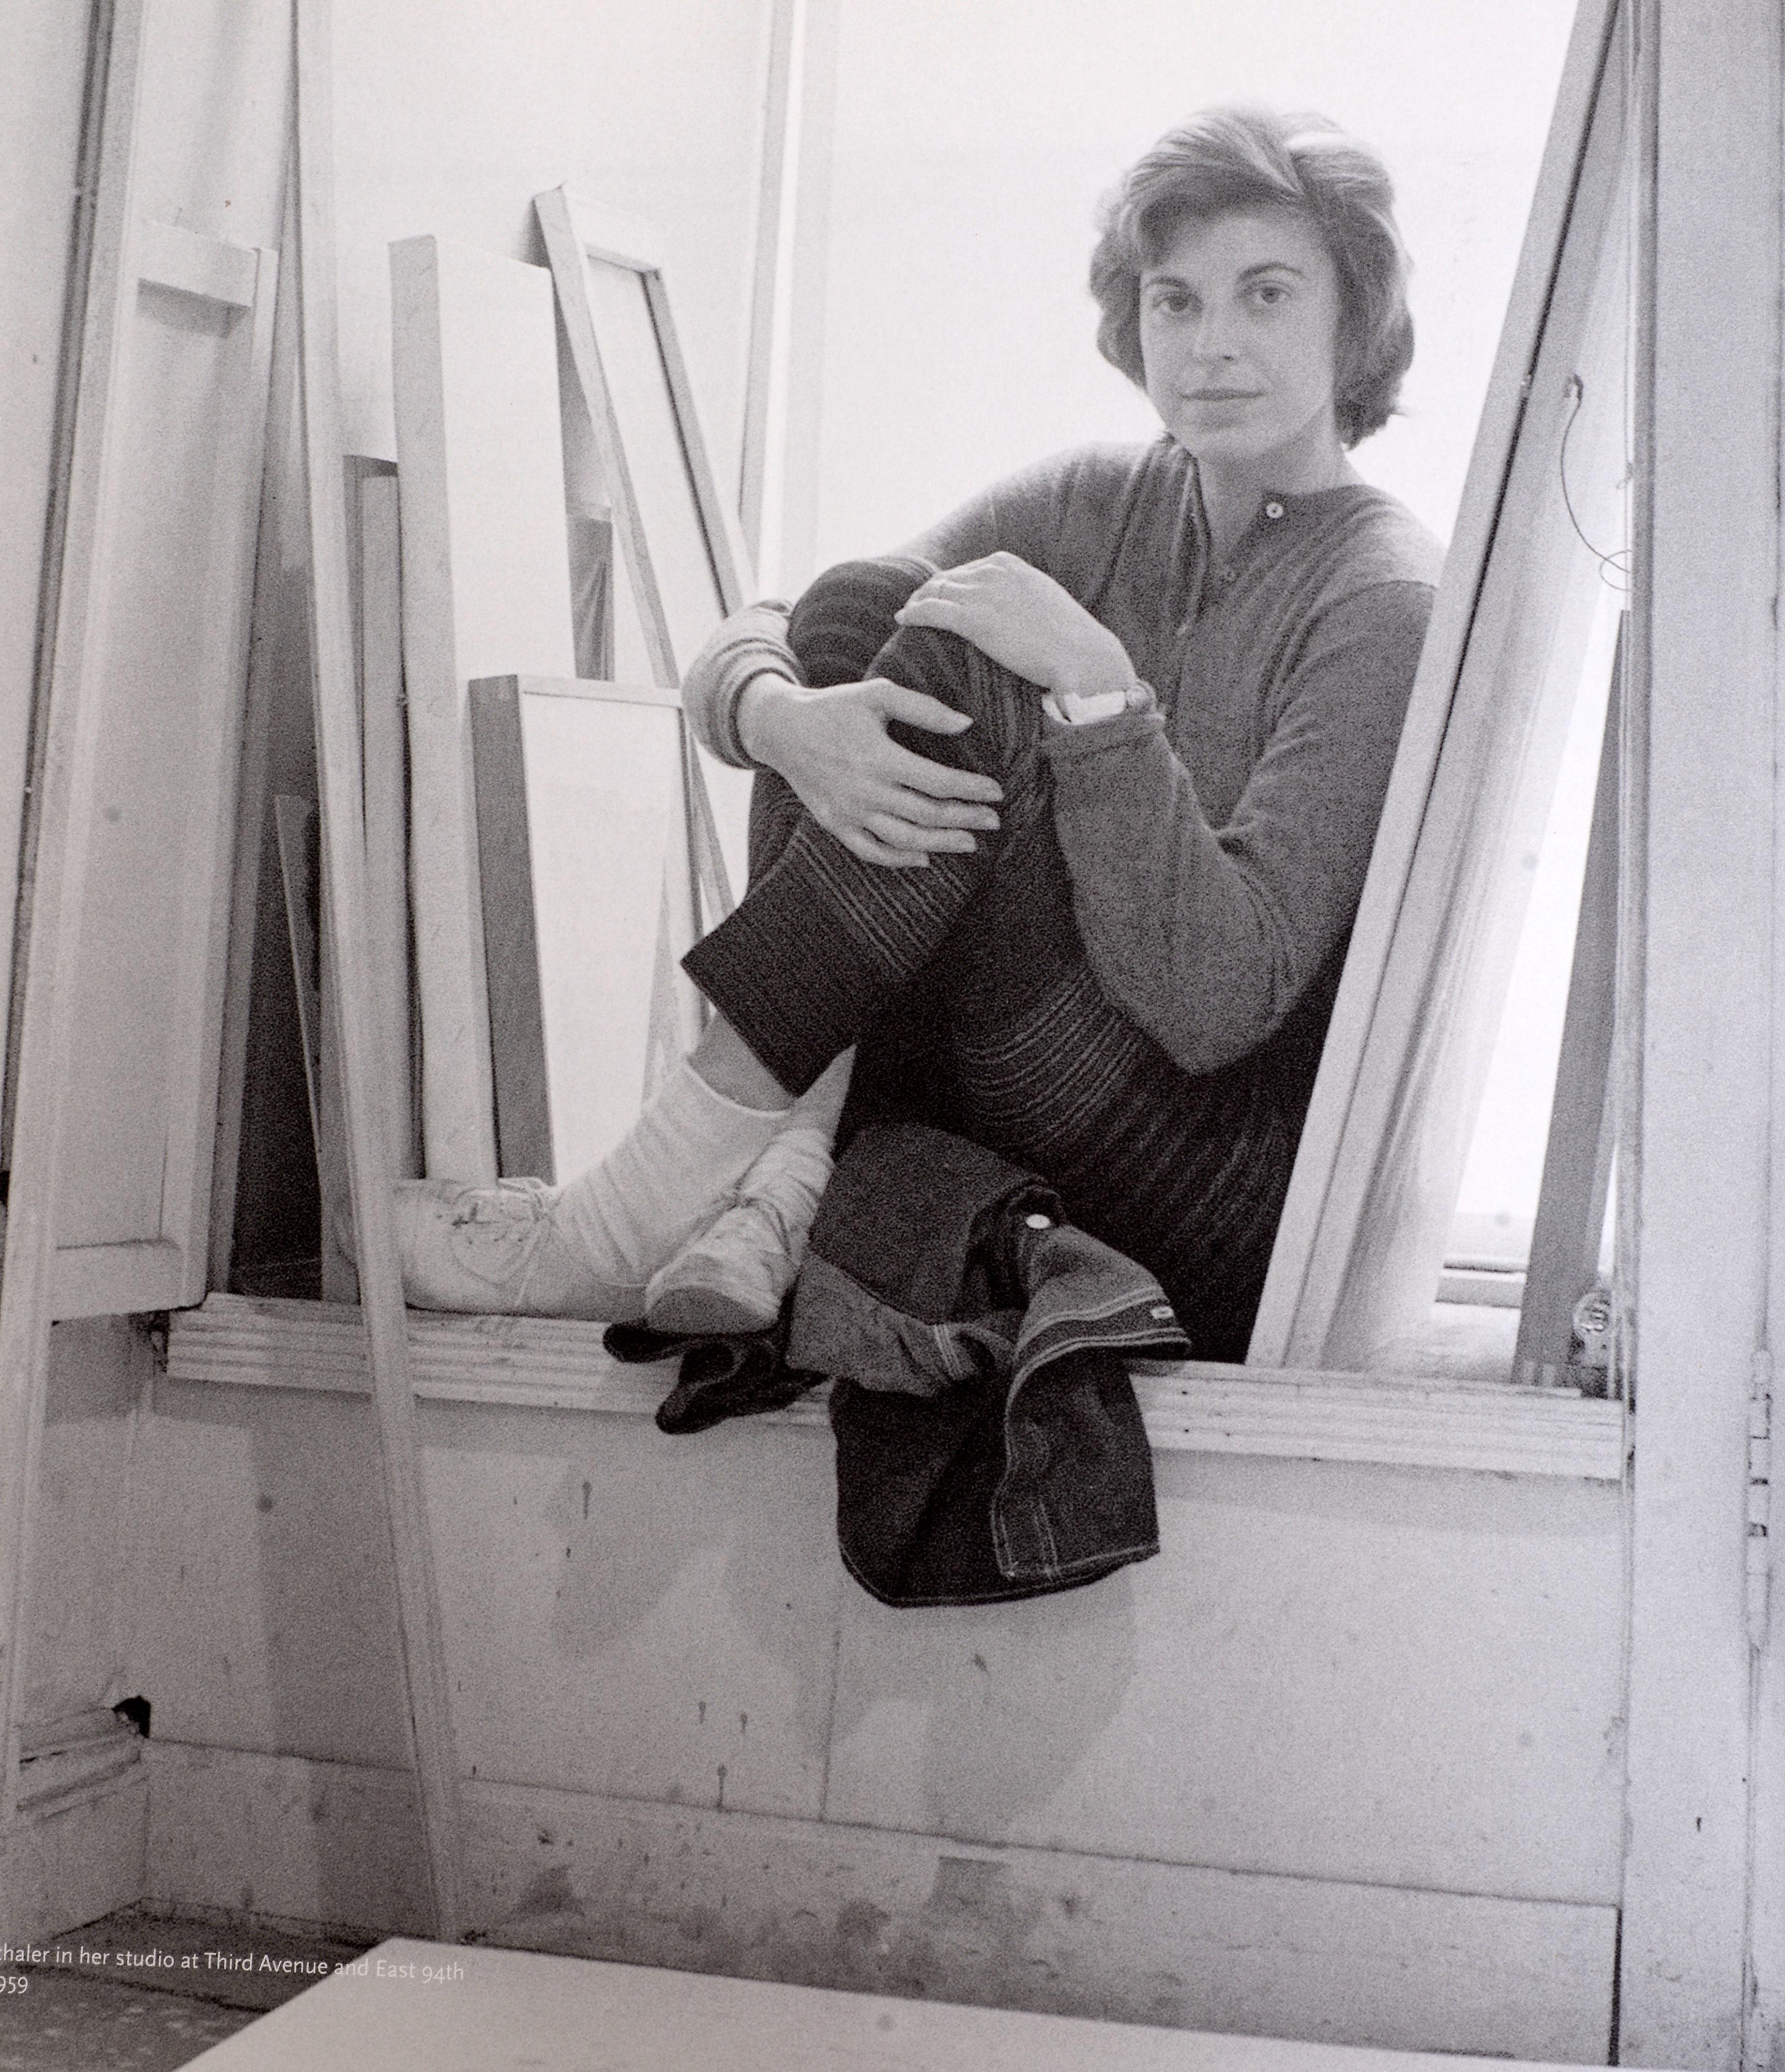 Painted on 21st Street, Helen Frankenthaler from 1950-1959 by John Elderfield. Published by Gagosian Gallery / Abrams, New York, 2013. 1st Ed Exhibition hardcover catalog, no dust jacket as issued. Gagosian, in cooperation with the Estate of Helen